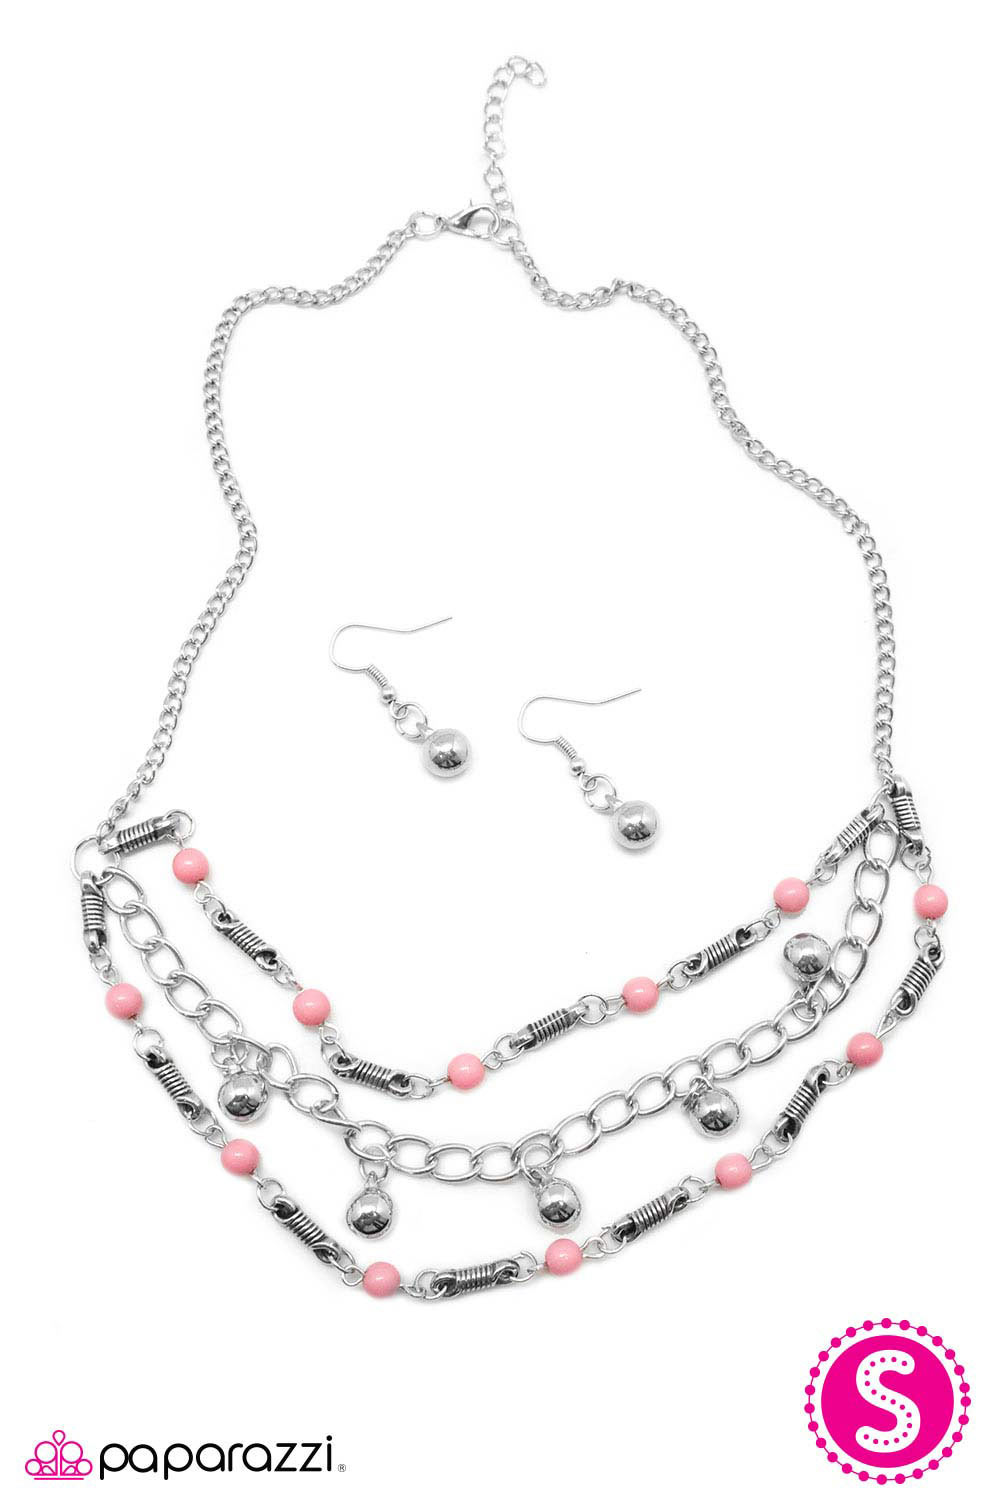 Paparazzi ♥ Only the Finest - Pink ♥  Necklace